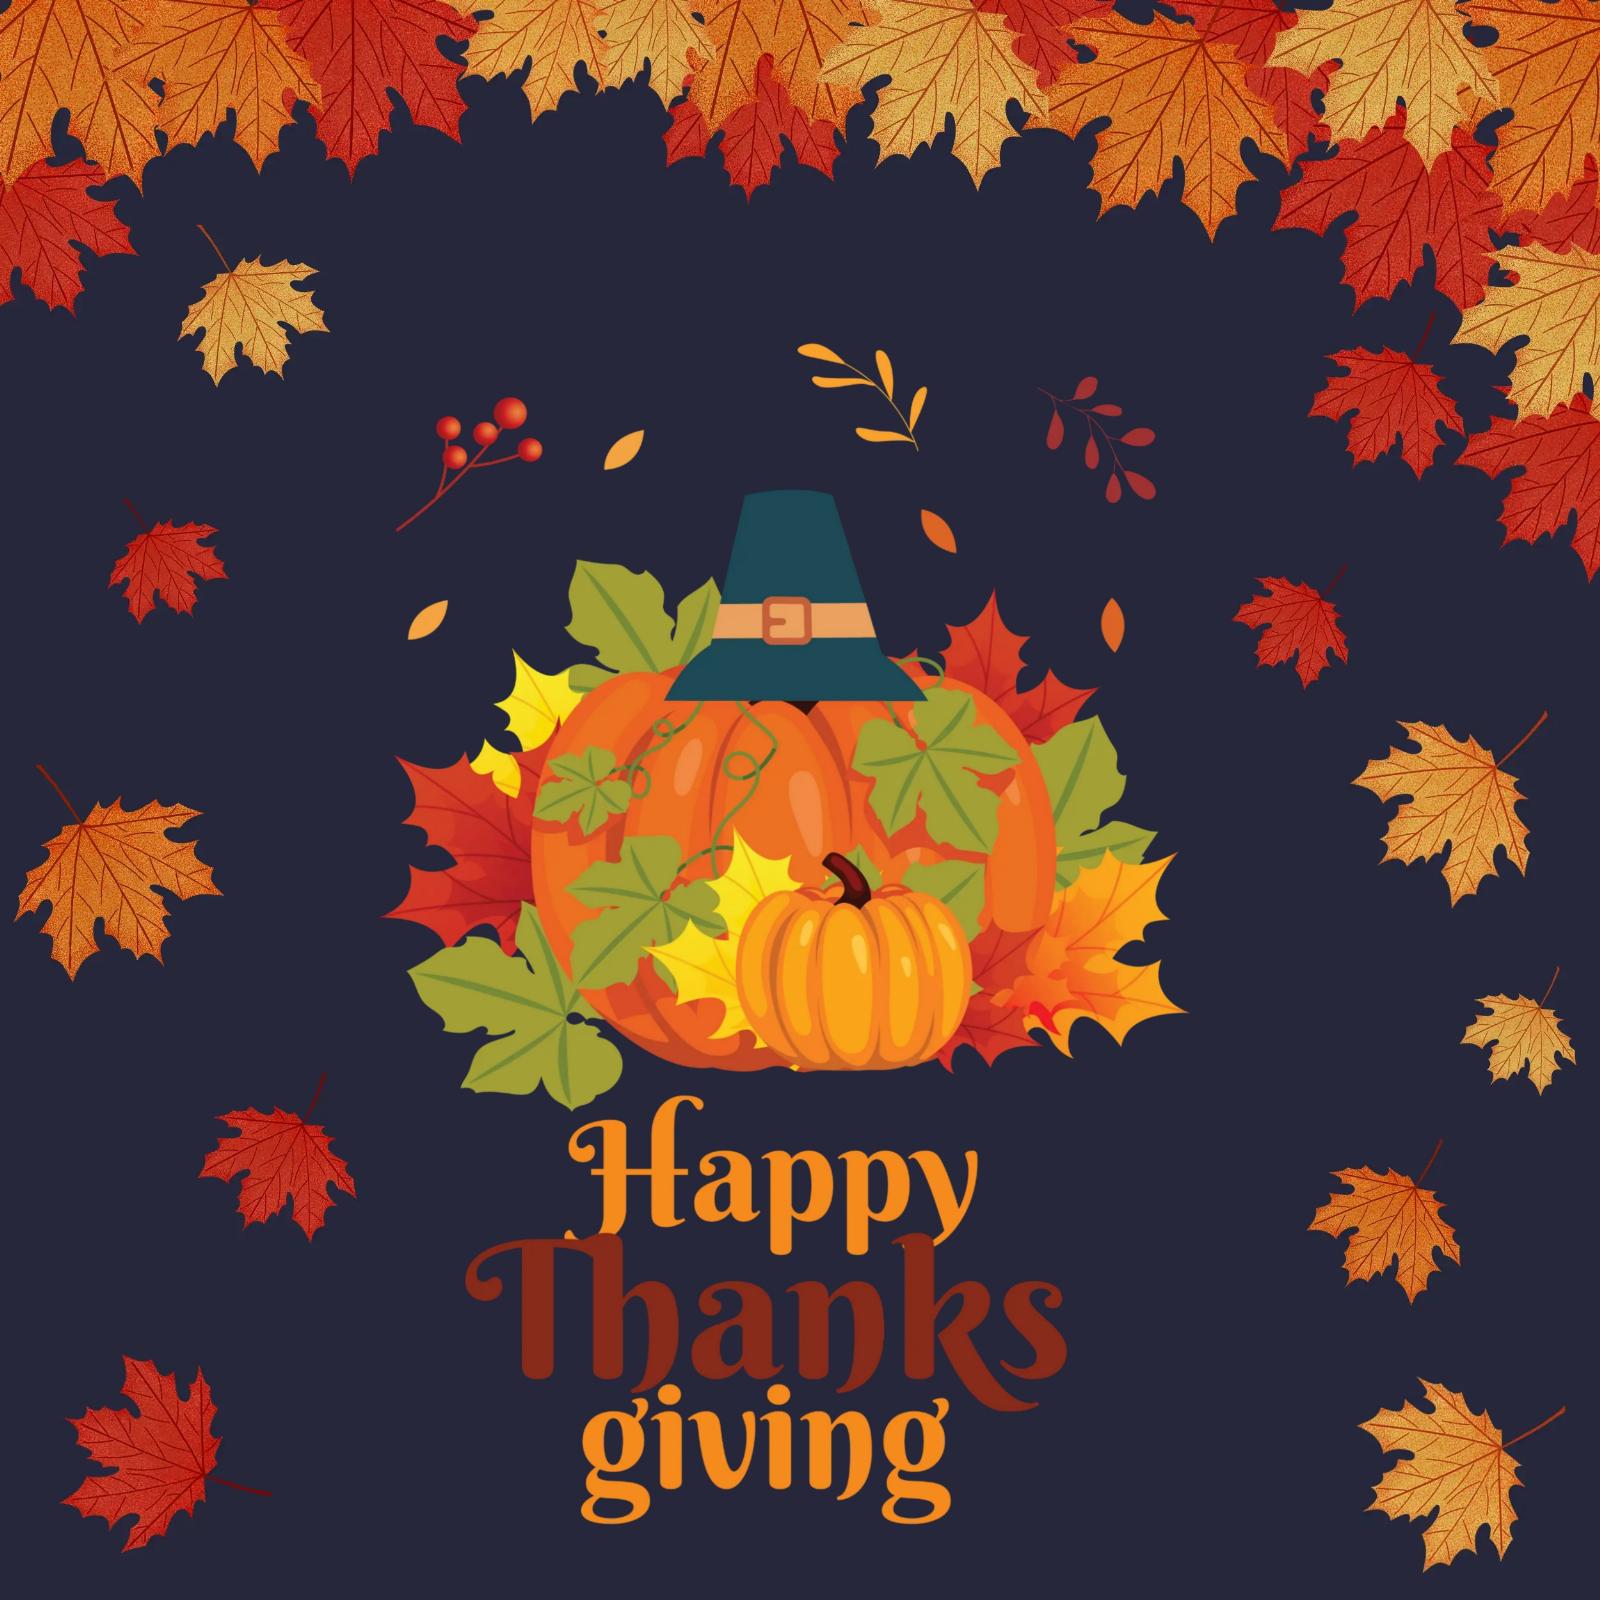 Happy Thanksgiving Wishes Images